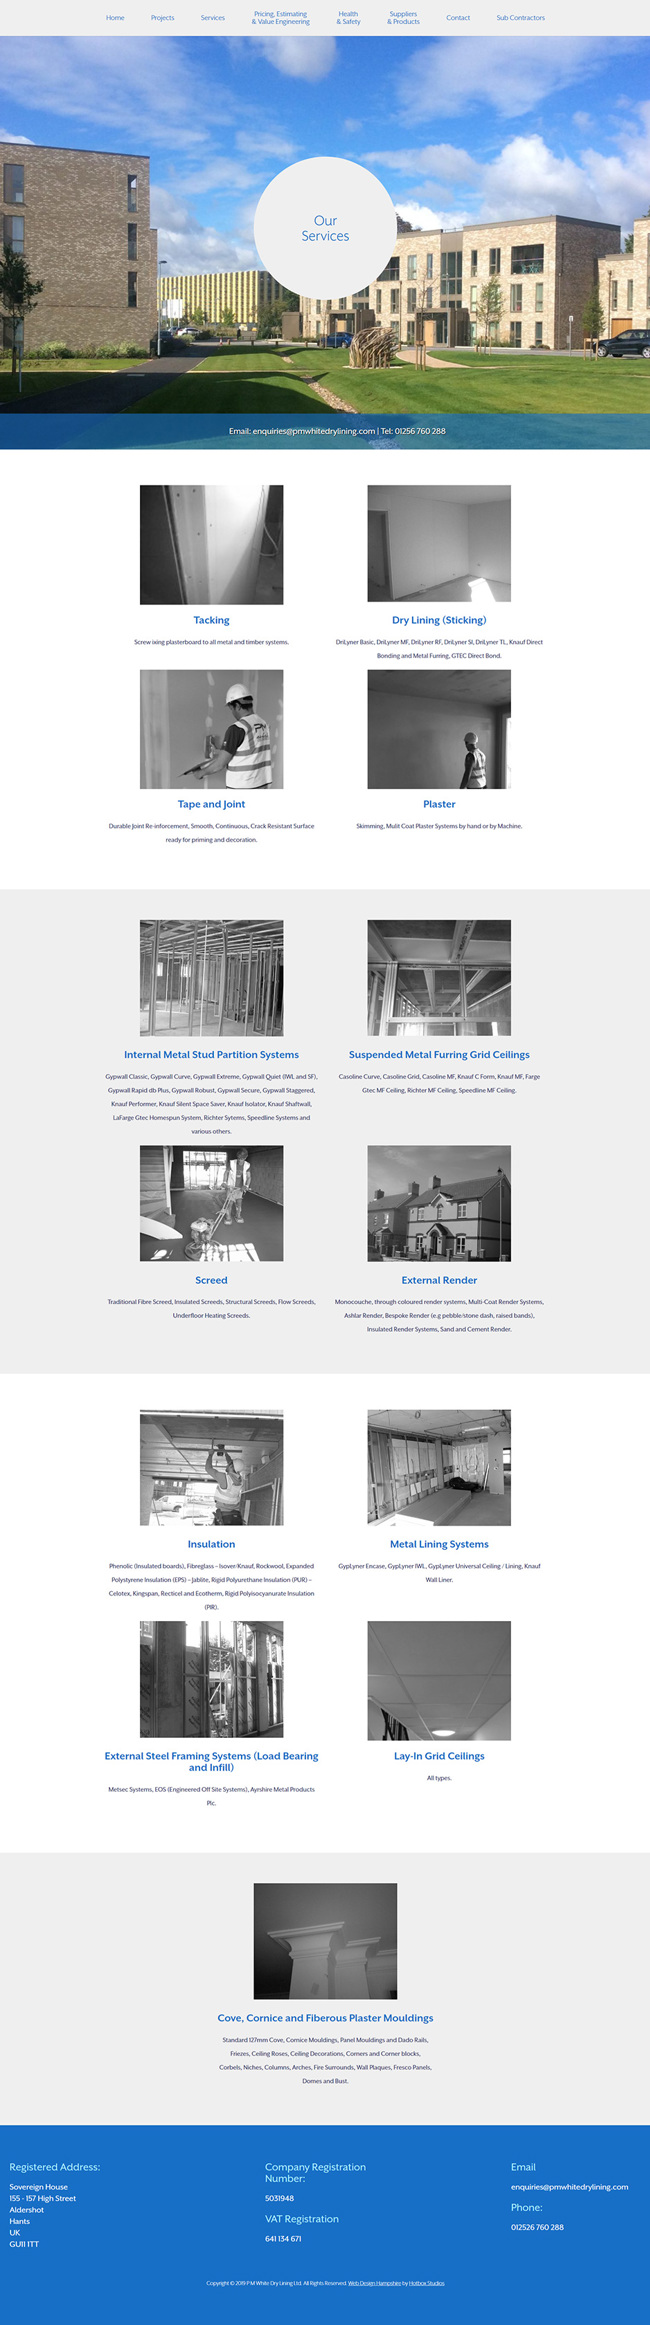 PM White Dry Lining Website Design and WordPress Development SP006 Services